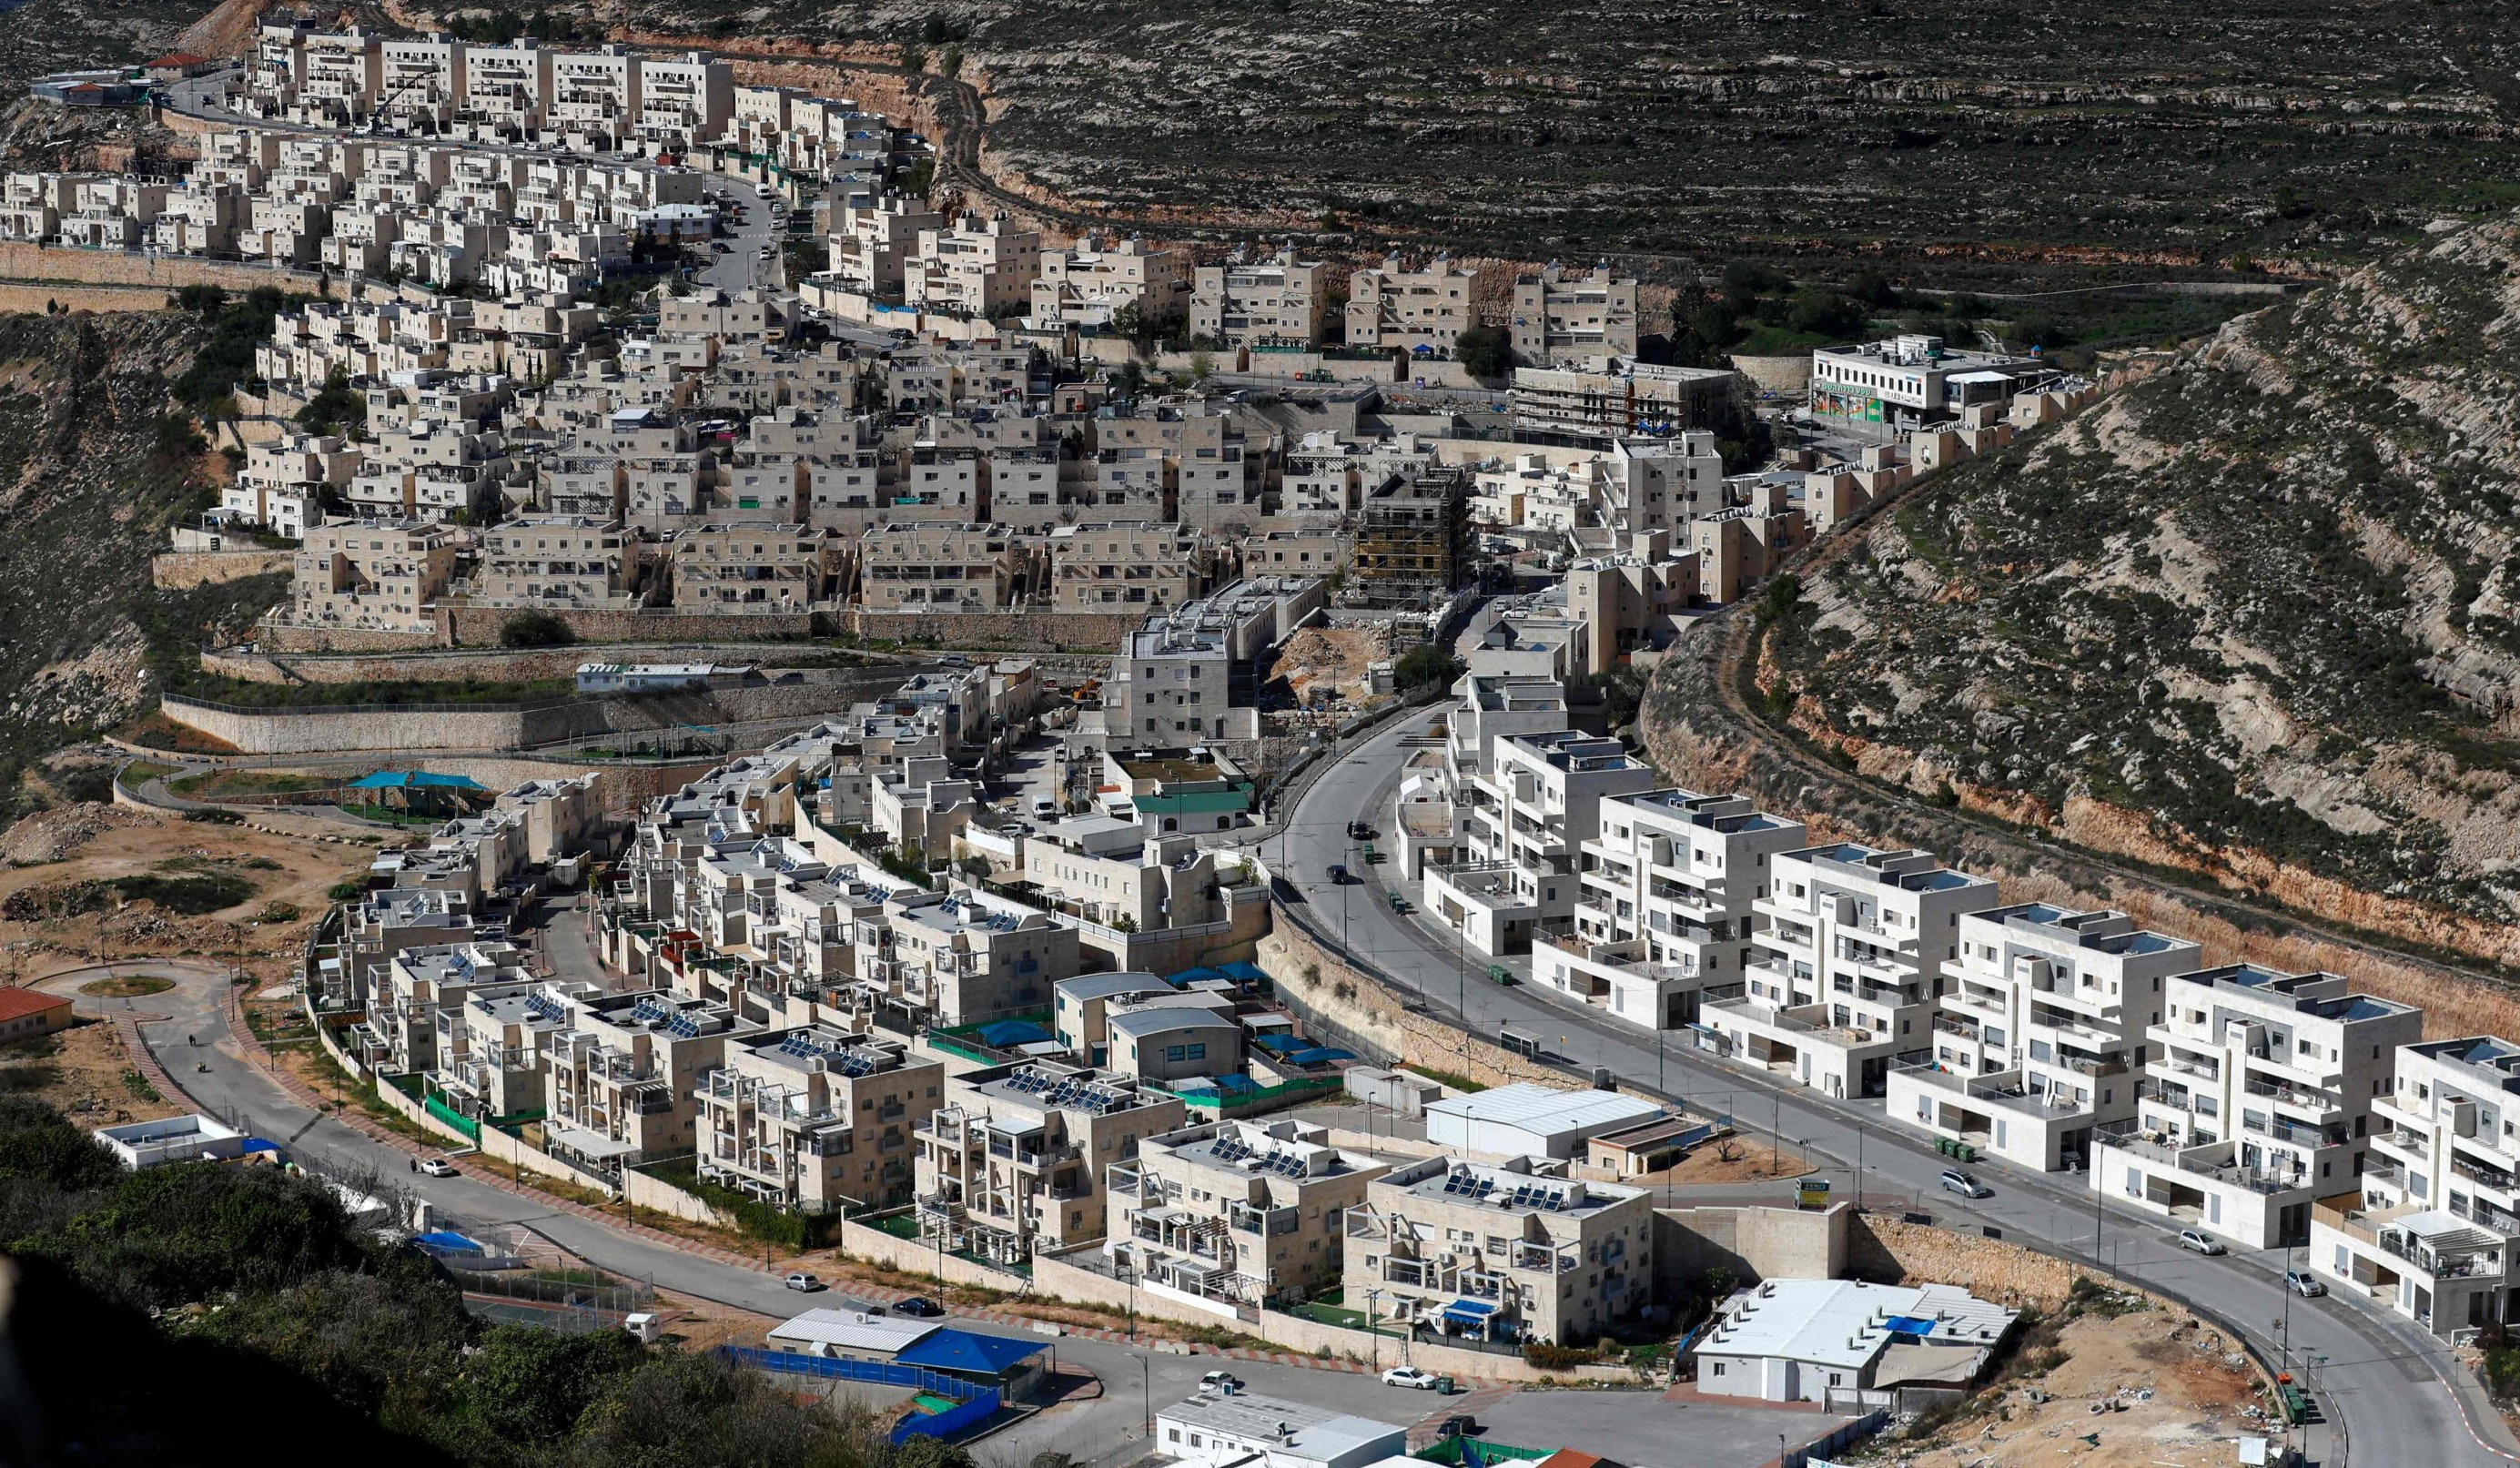 European countries called on Israel to cancel plans to build new housing in West Bank